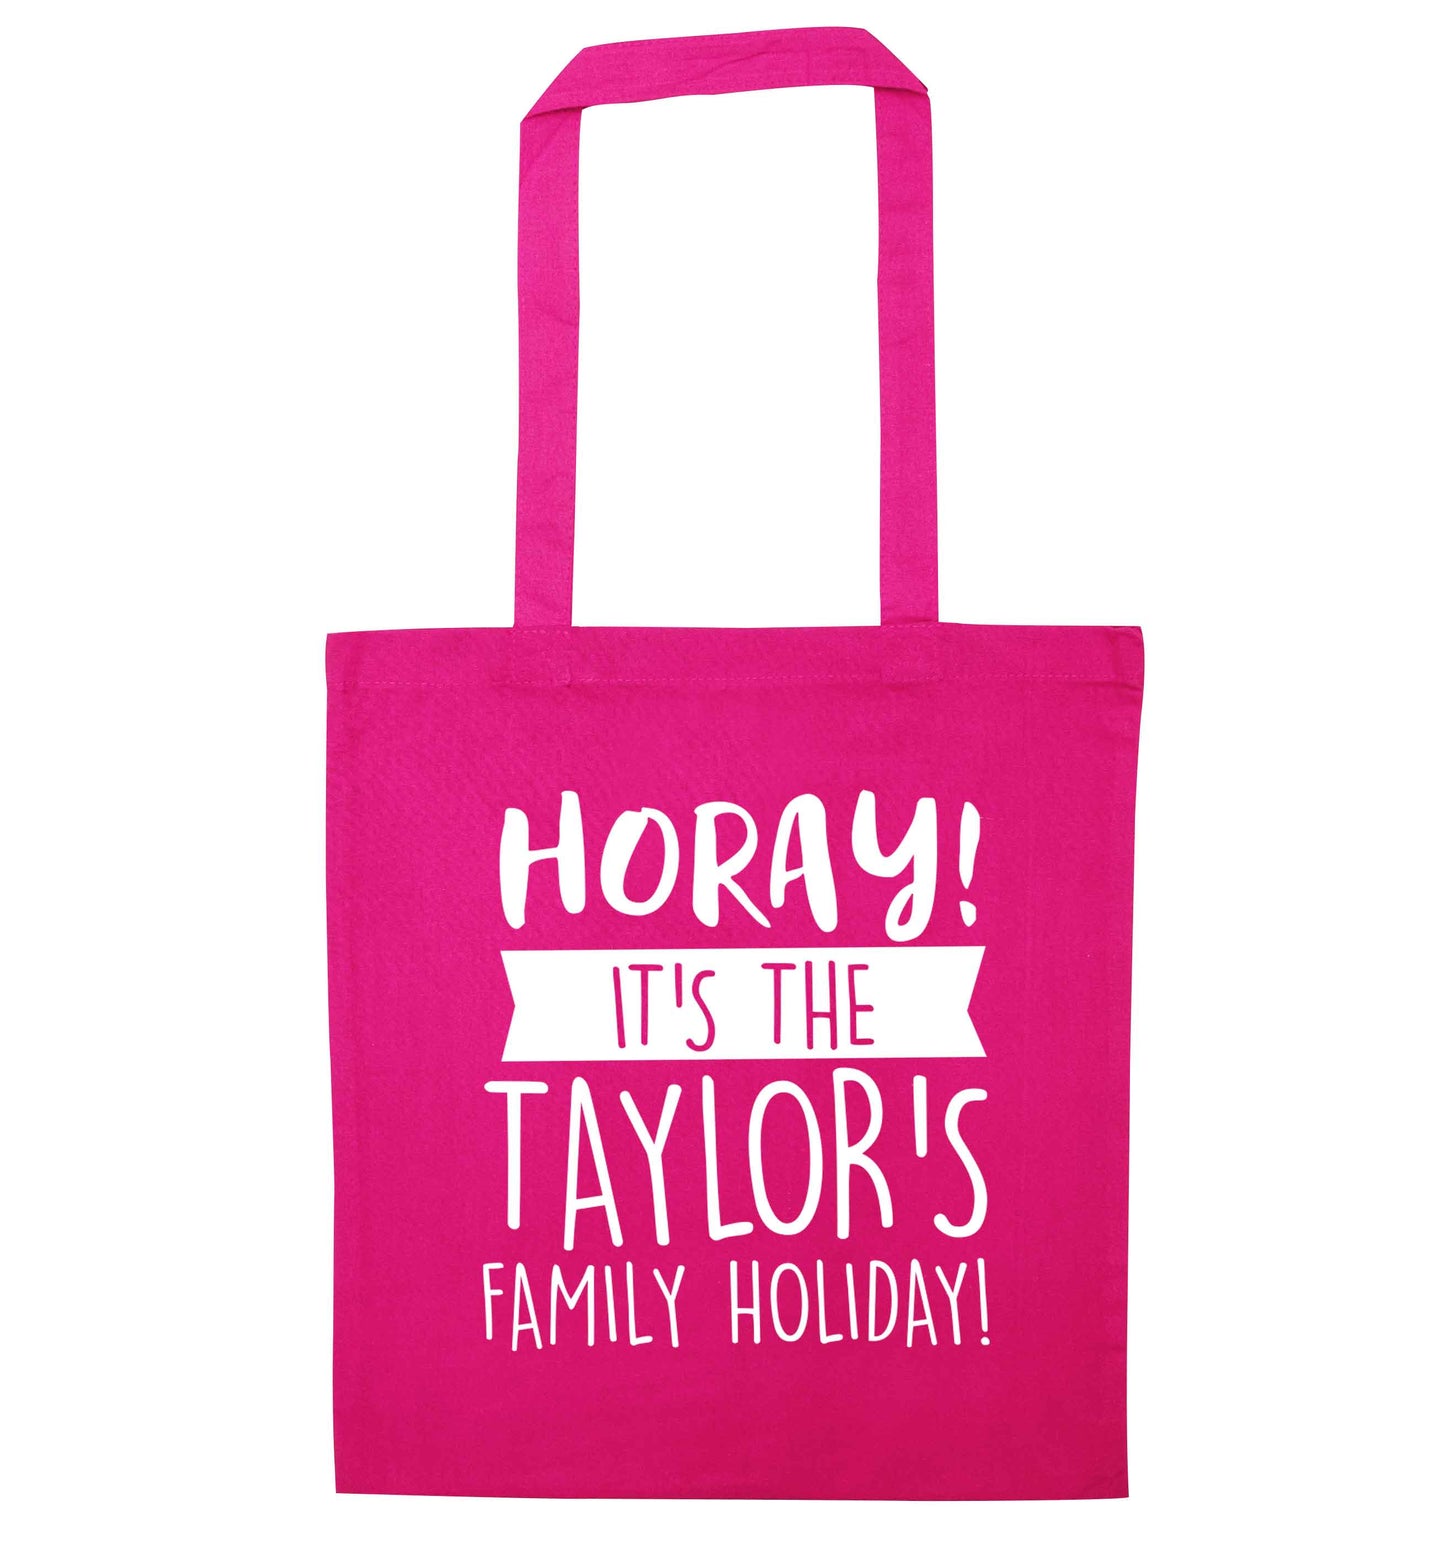 Horay it's the Taylor's family holiday! personalised item pink tote bag